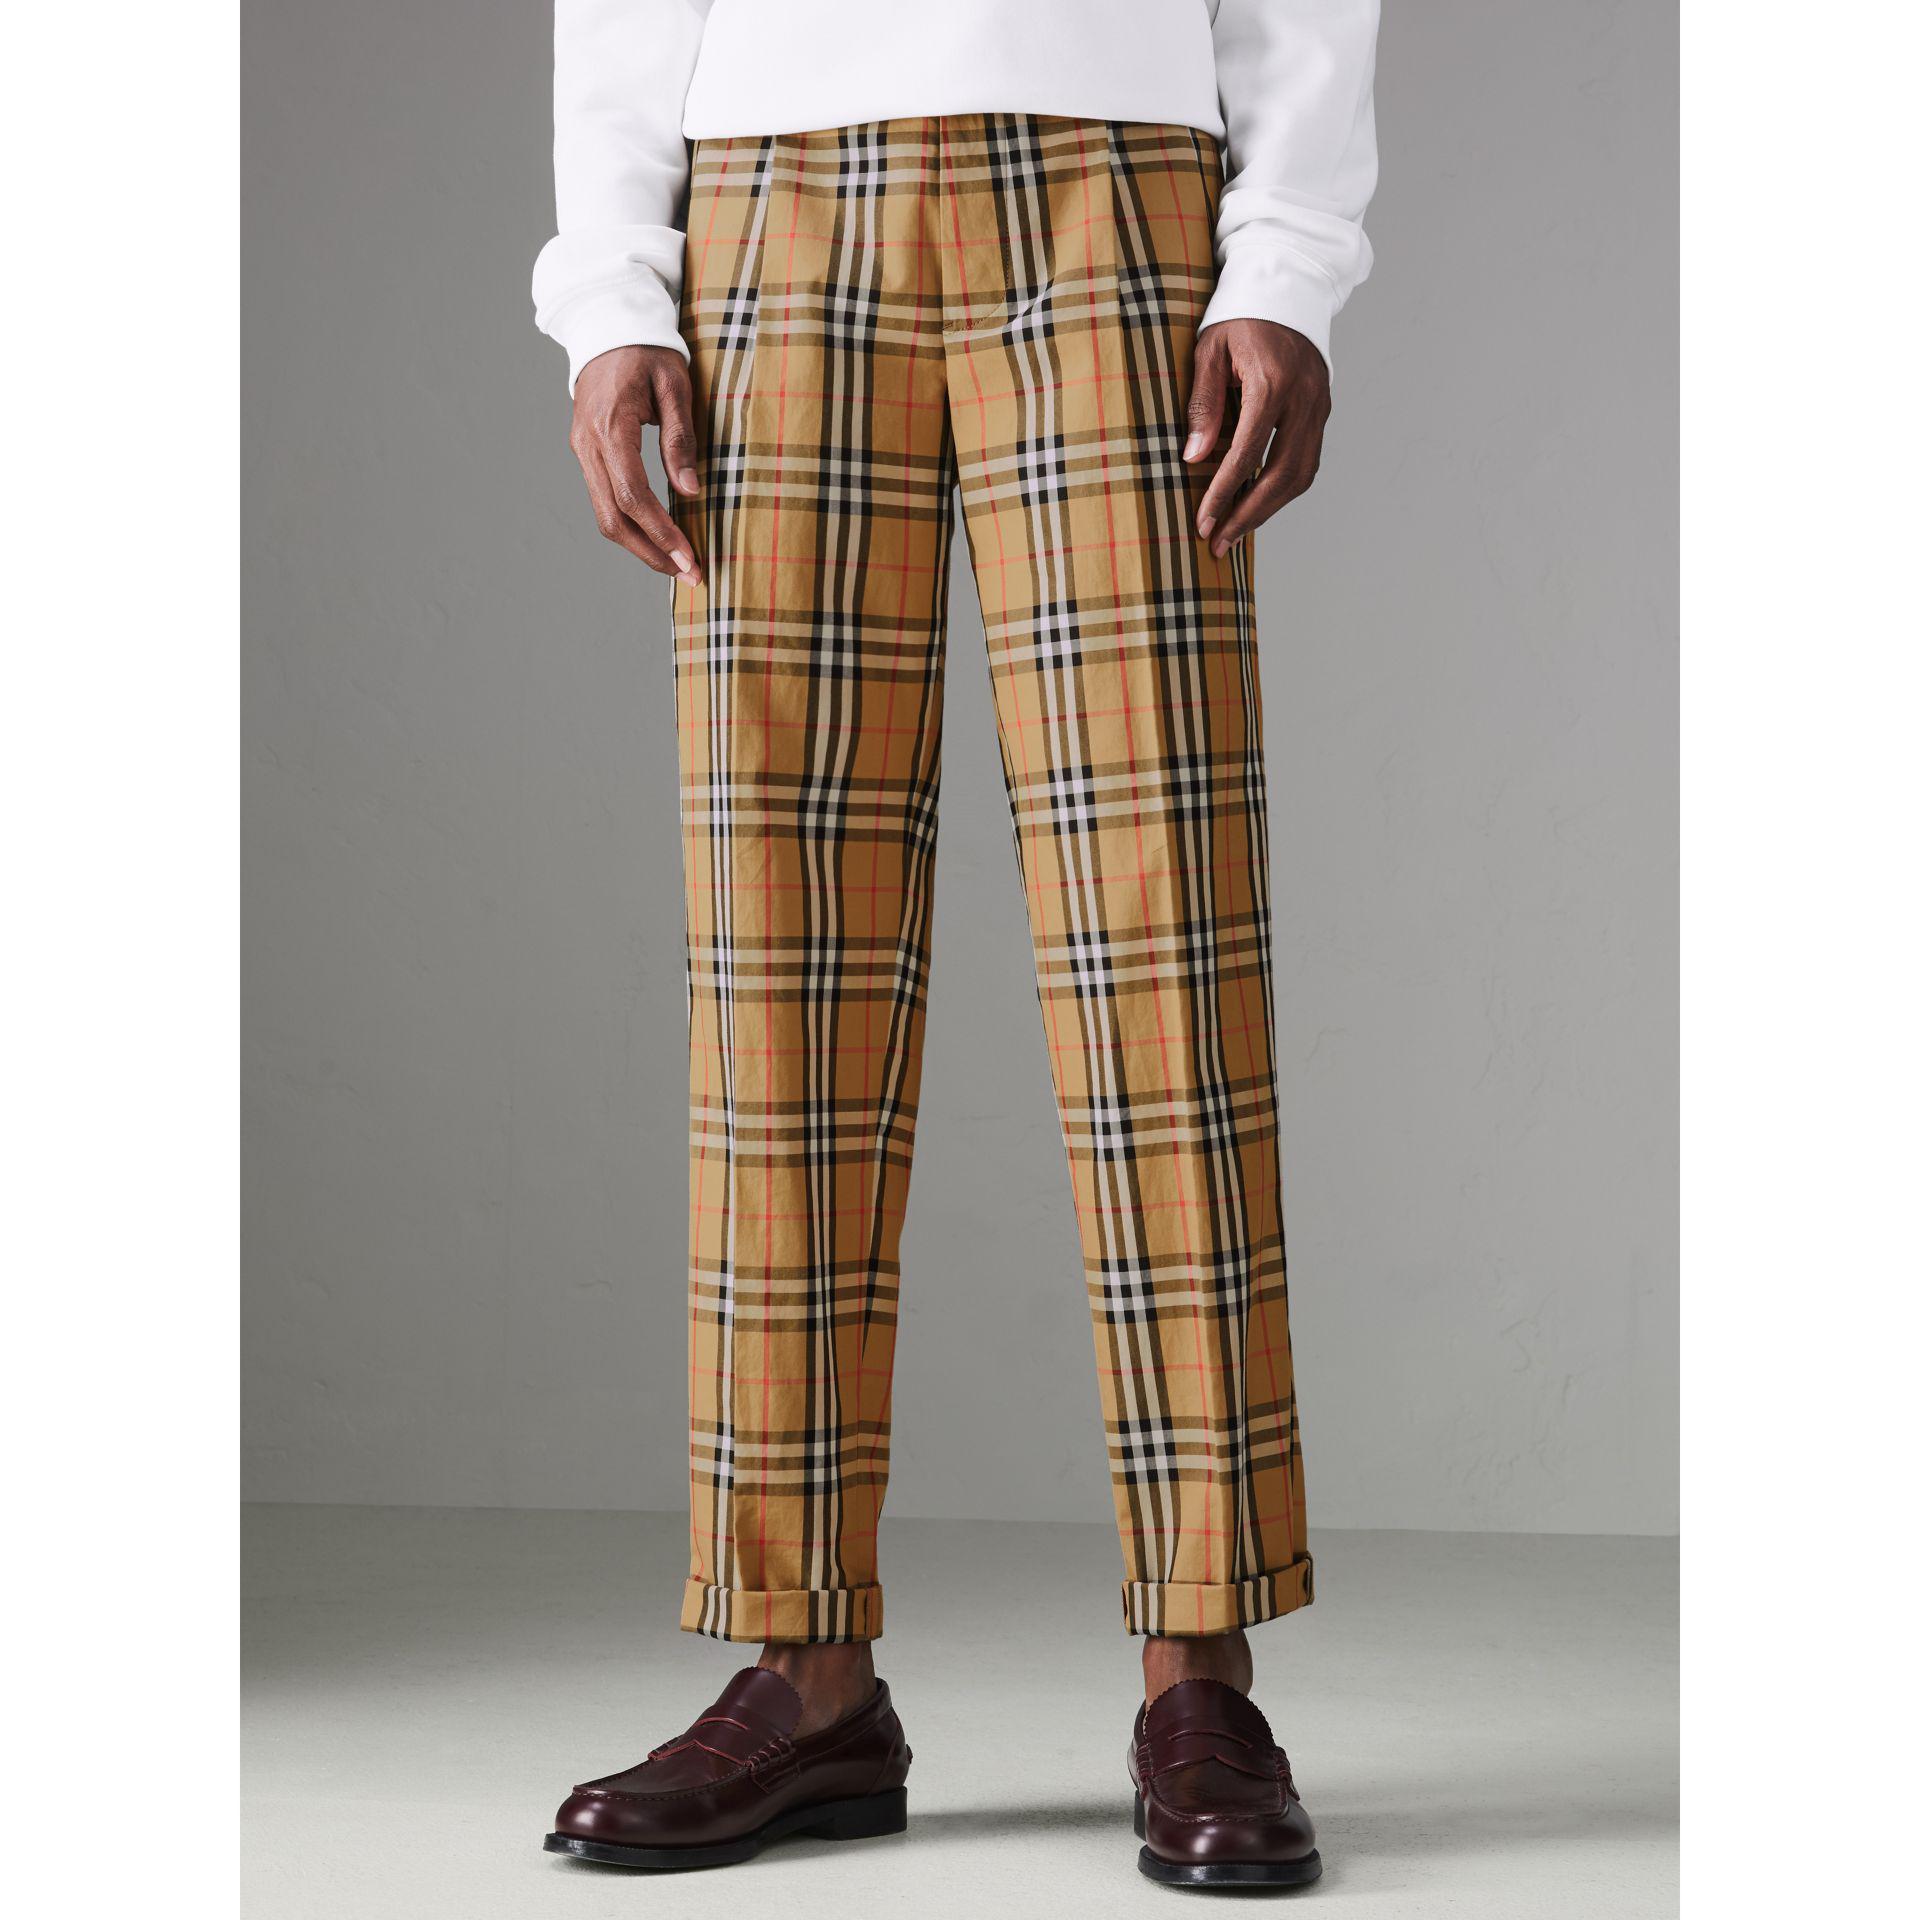 Quality assurance > burberry vintage check pants, Up to 74% OFF